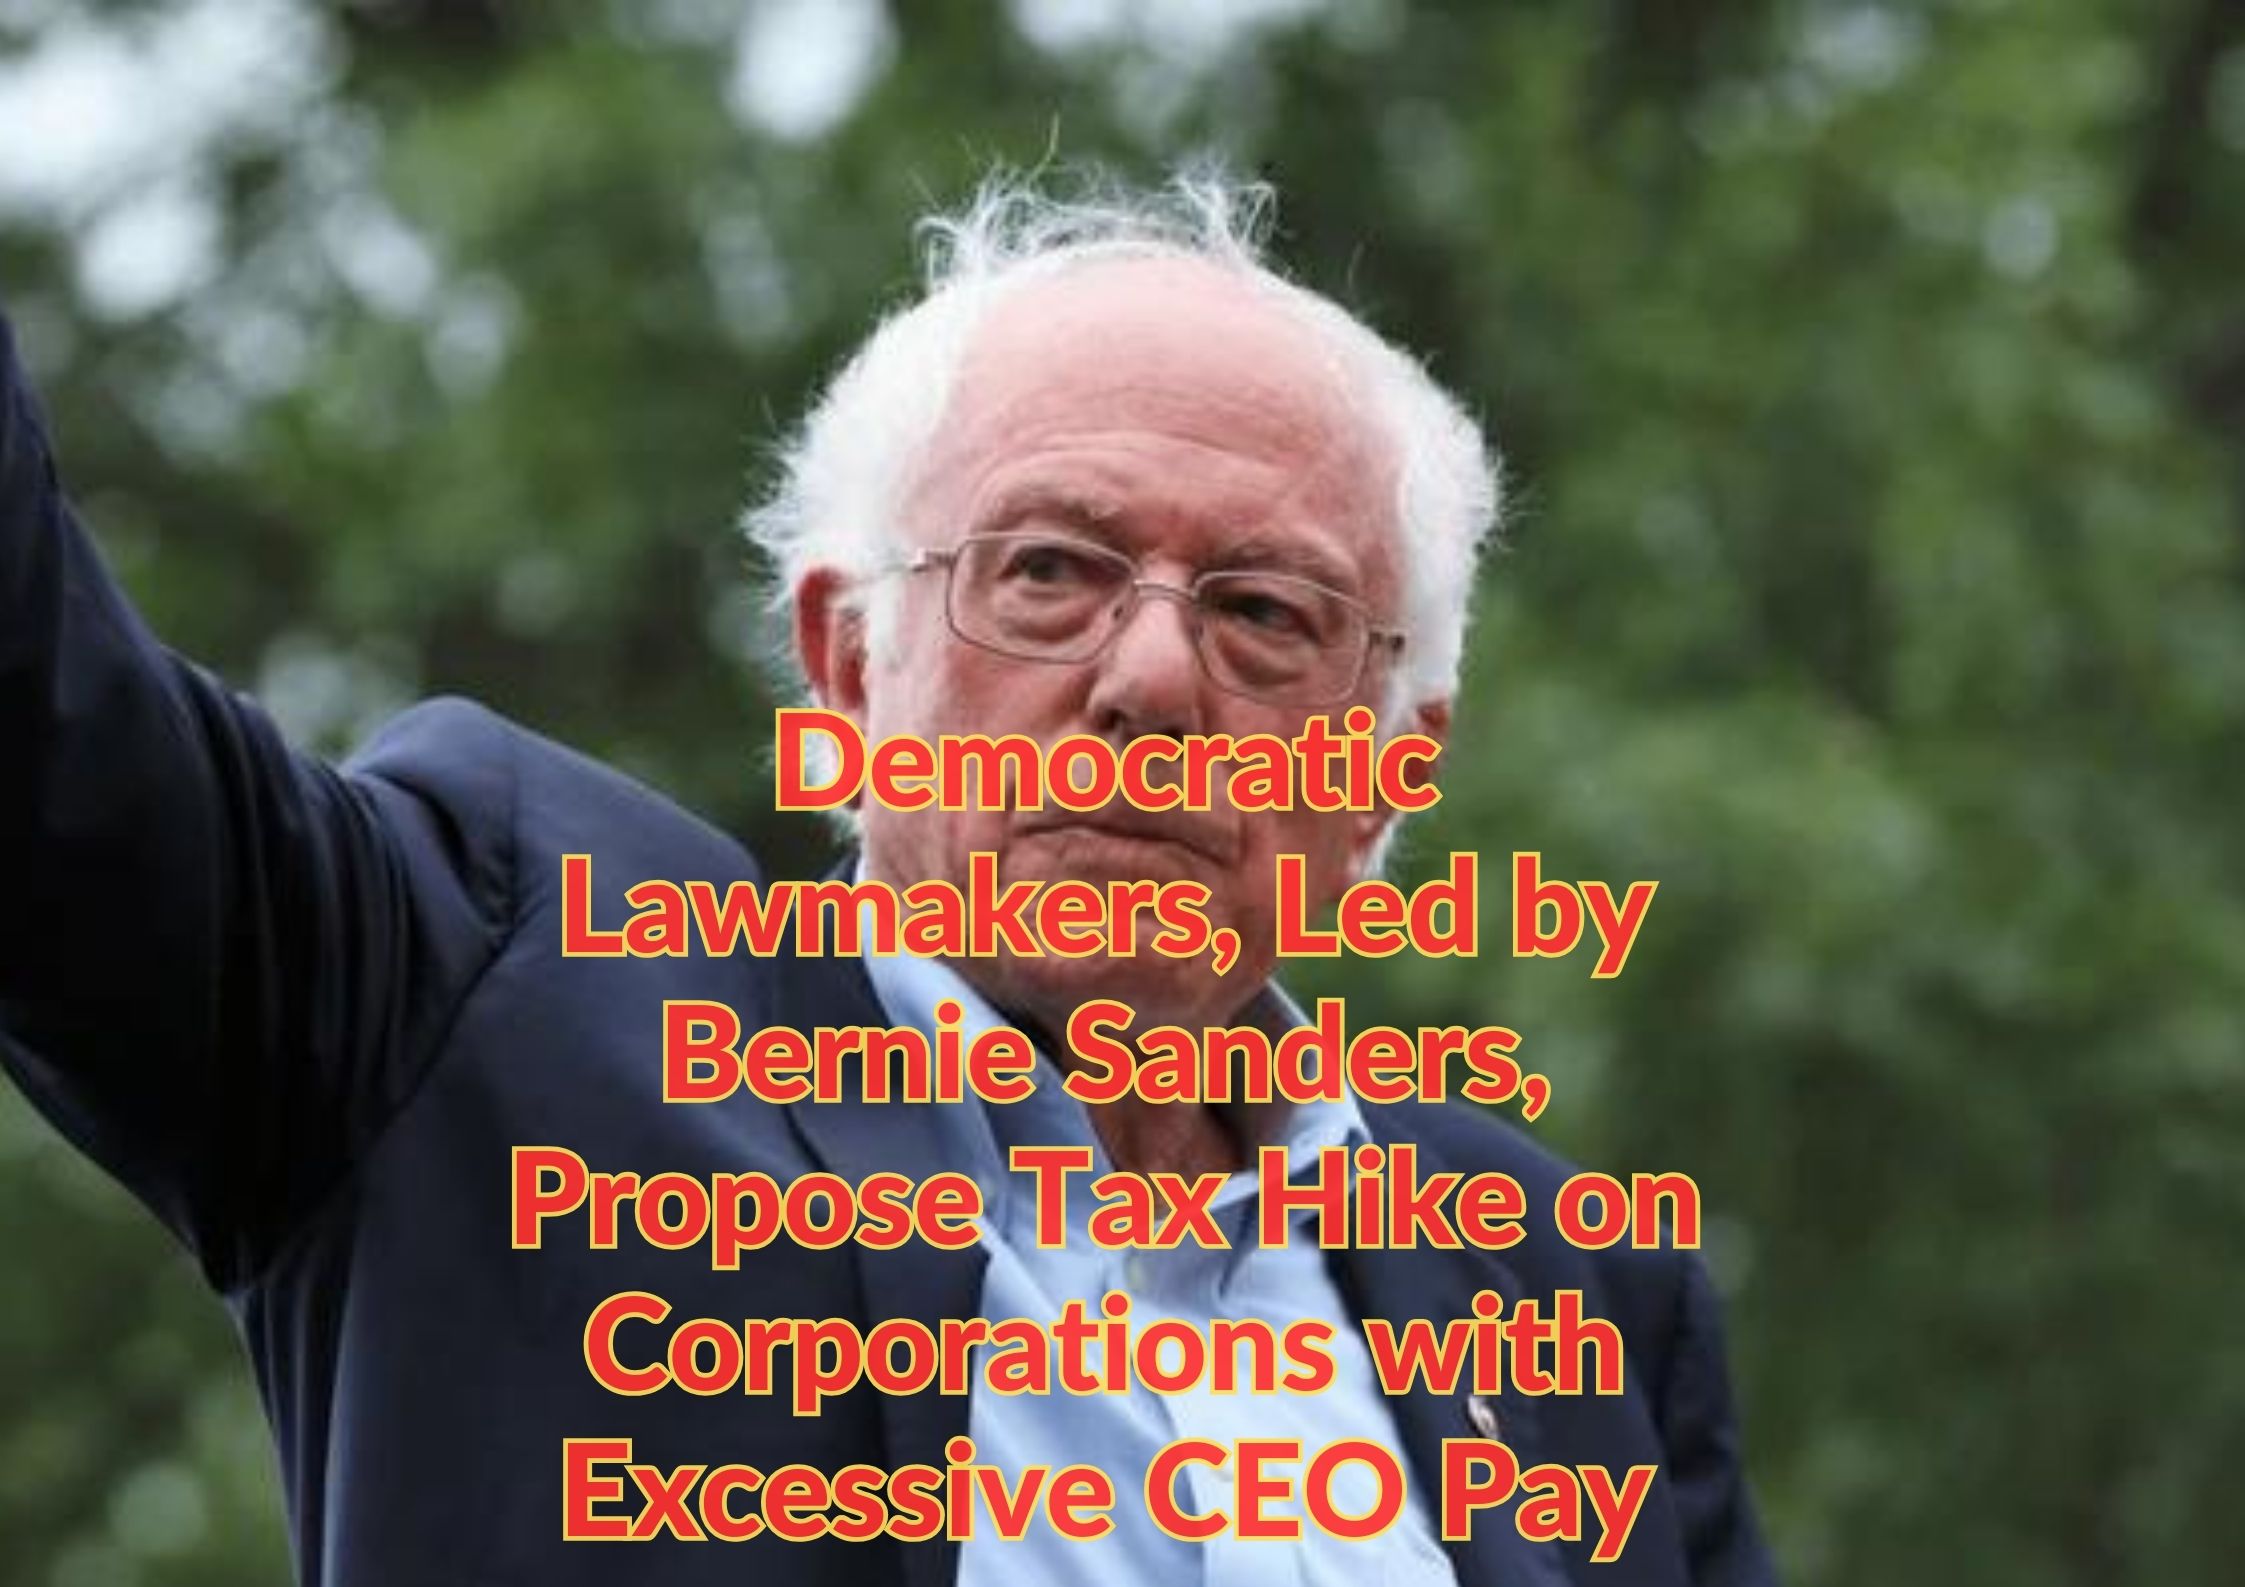 Democratic Lawmakers, Led by Bernie Sanders, Propose Tax Hike on Corporations with Excessive CEO Pay